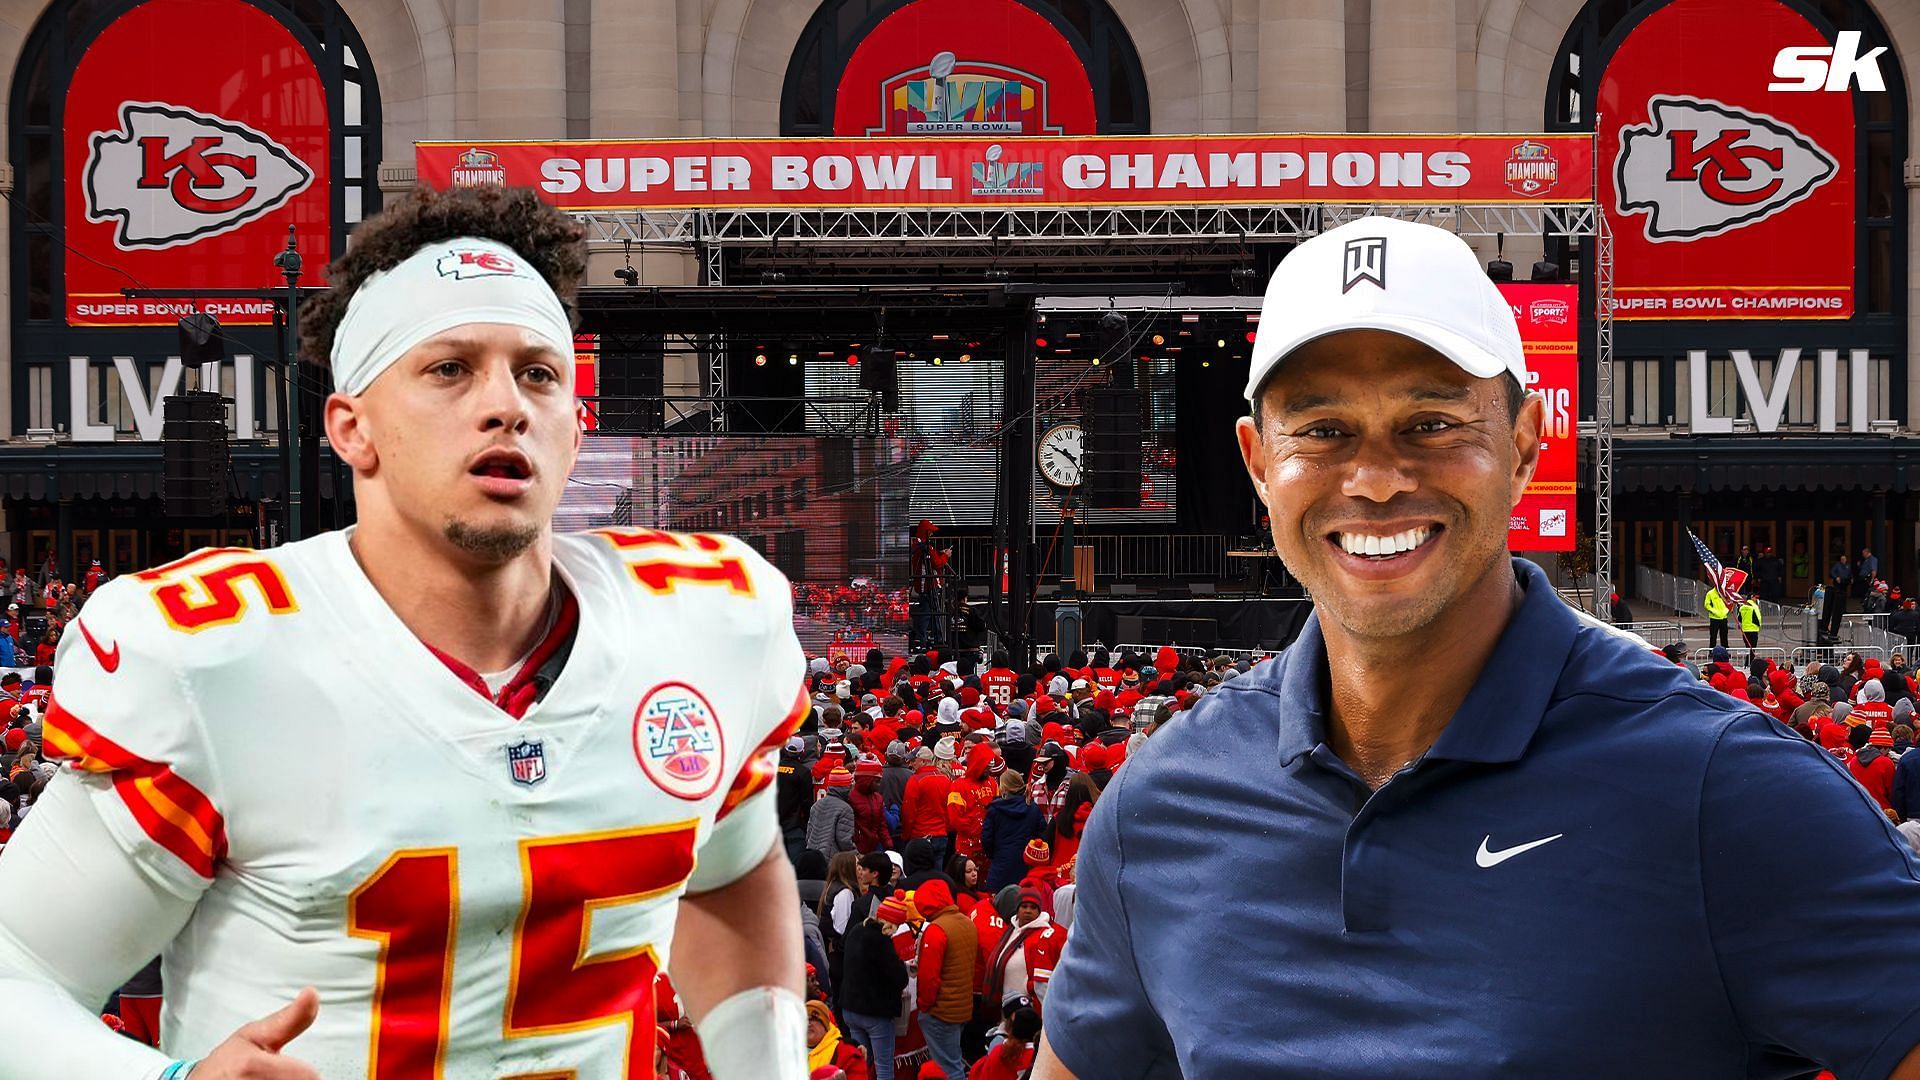 Patrick Mahomes gets compared to Tiger Woods by Shannon Sharpe